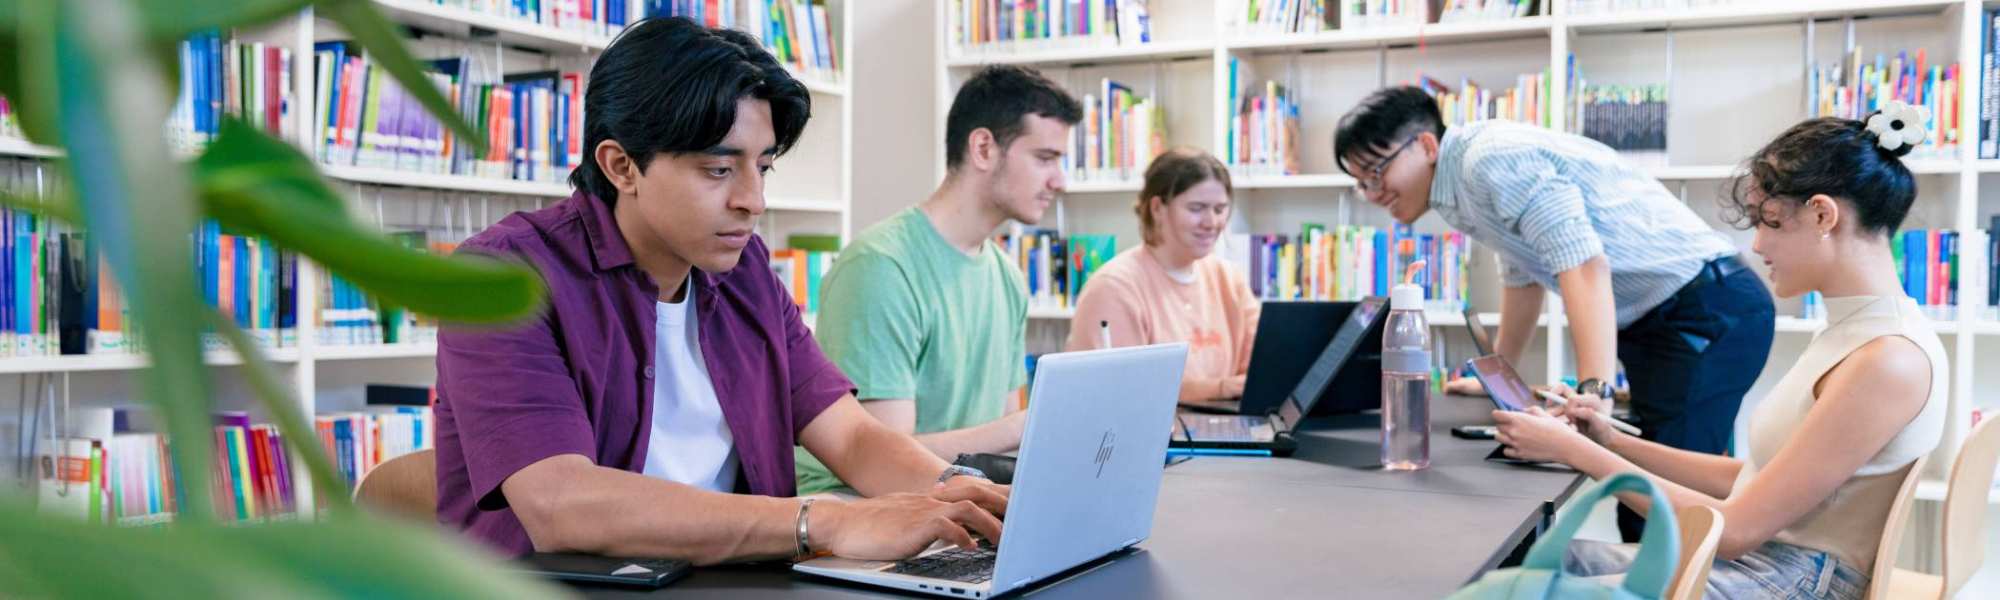 International students Diego, Tam, Nyugen, Noa and Andrei studying in the library at the Arnhem campus of HAN University of Applied Sciences.